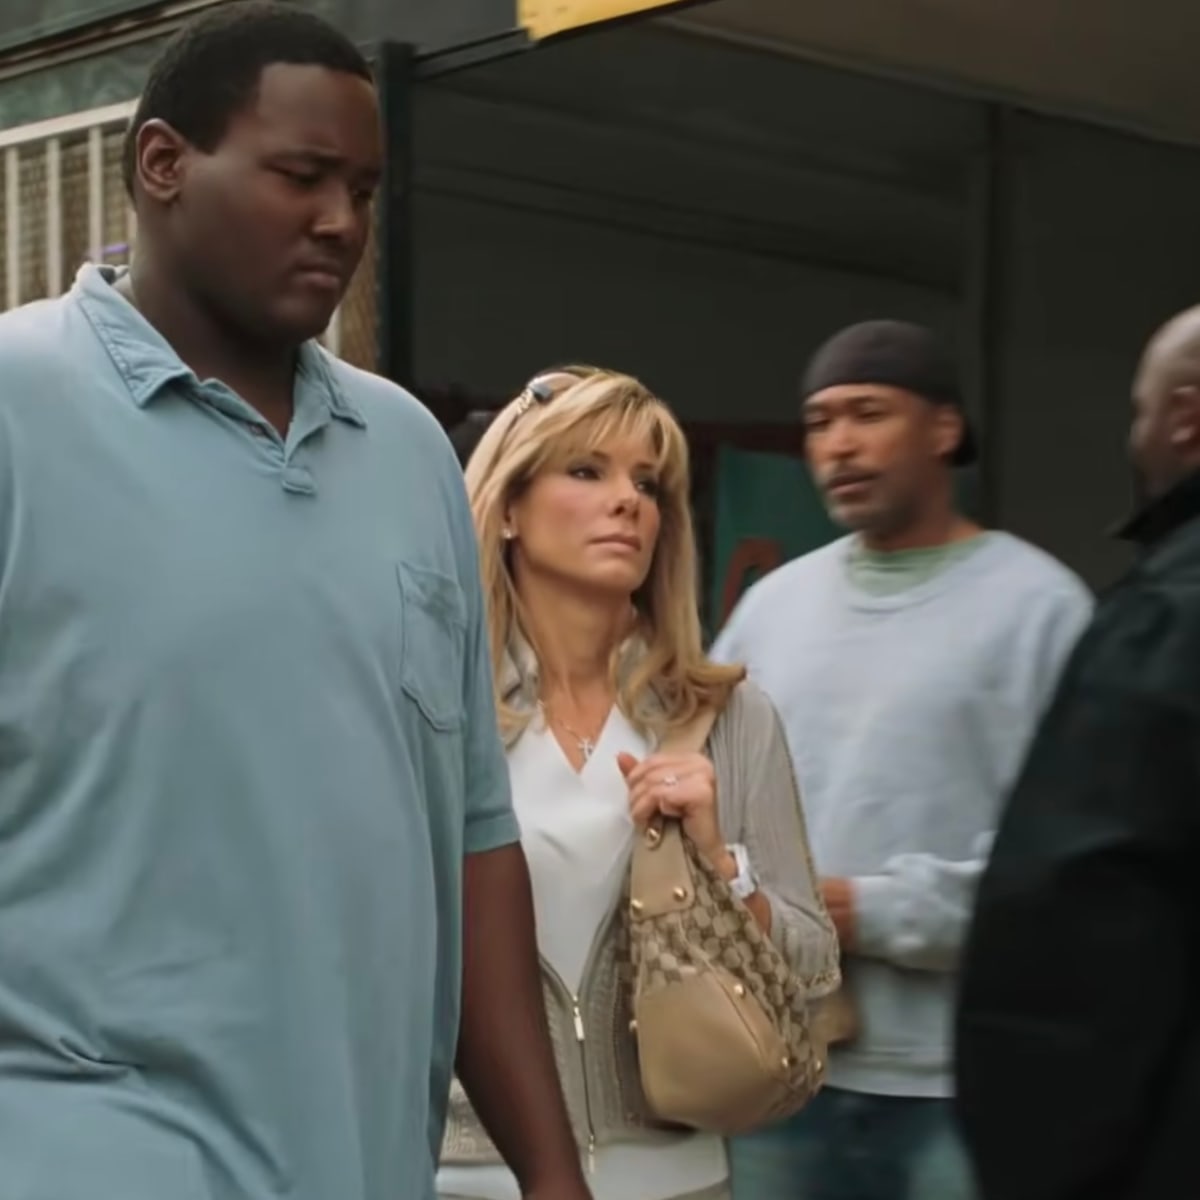 Subject of The Blind Side Alleges the Story was a Lie - Men's Journal